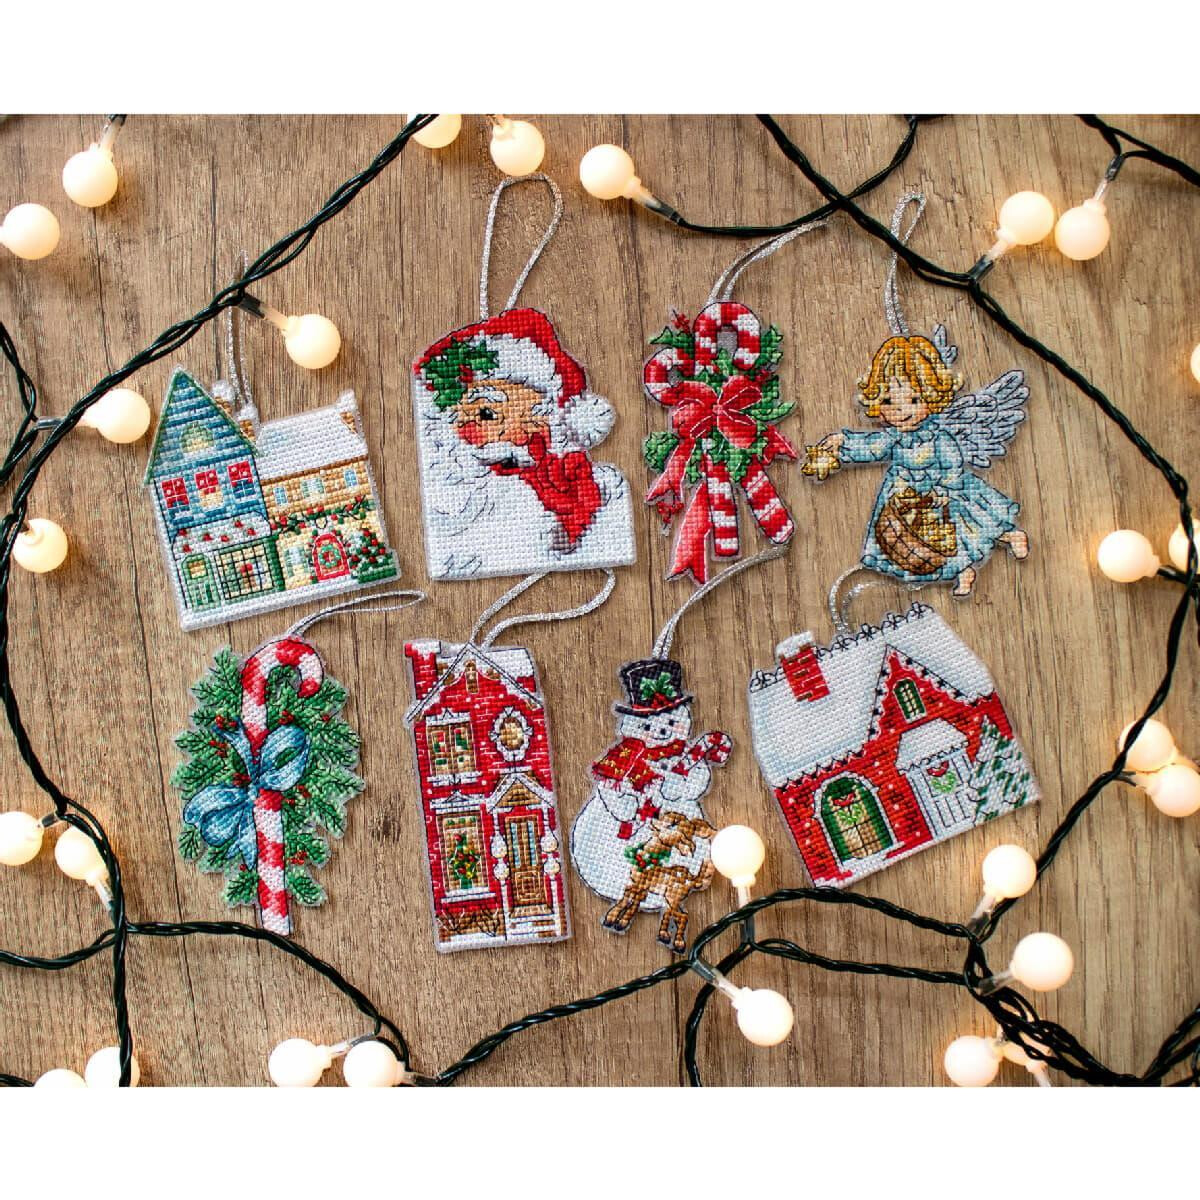 Seven Christmas cross stitch ornaments from our exclusive...